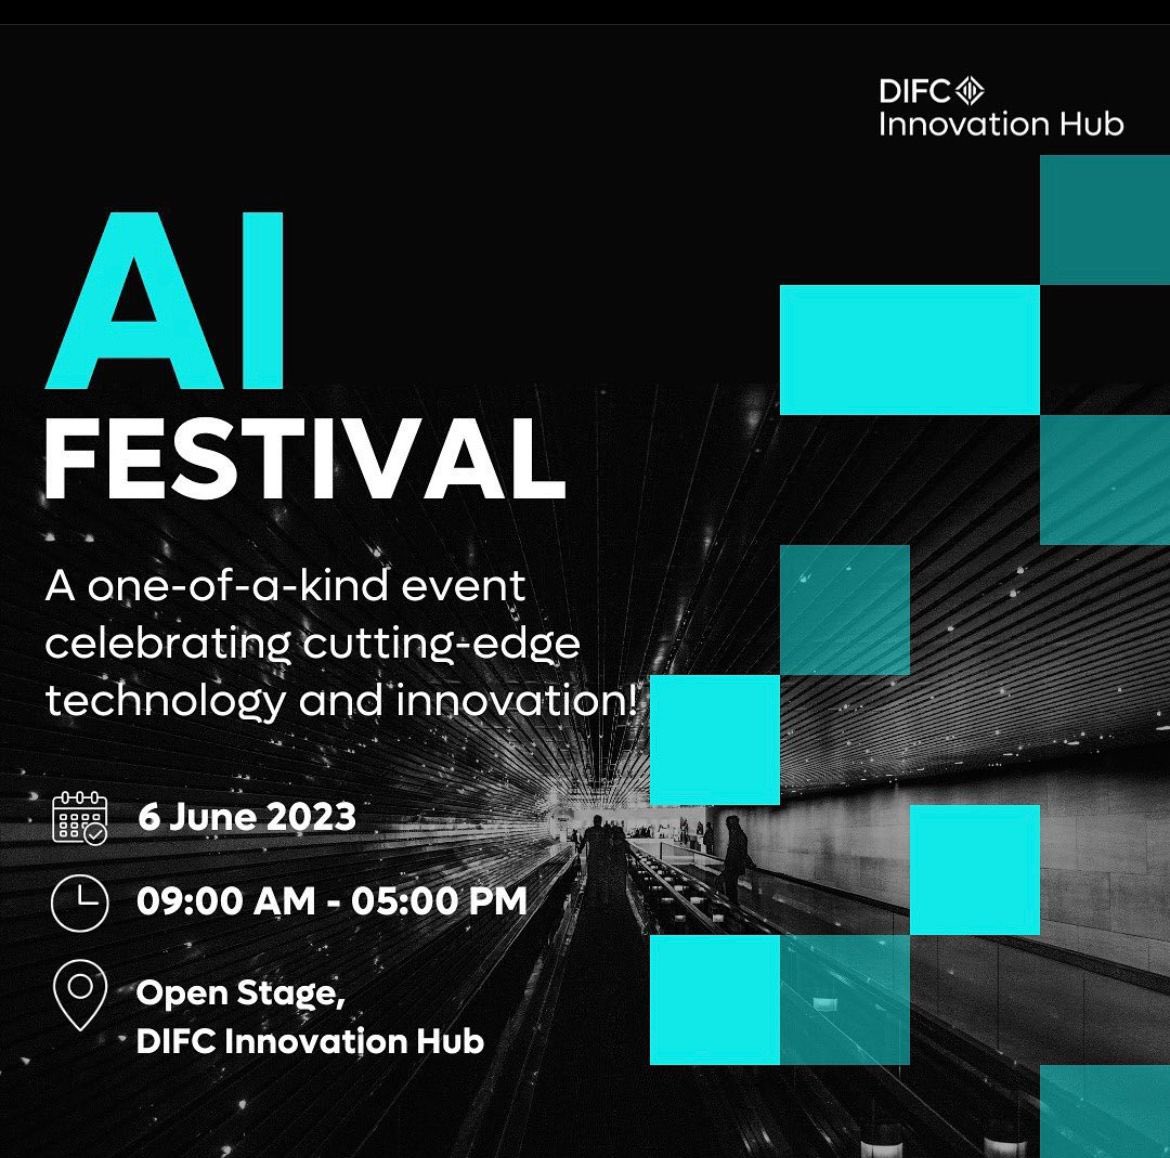 DM if you are looking at being part of it in UAE @DIFC  #difc #ArtificialIntelligence 

@InnovHubDIFC @MohdAlblooshi_